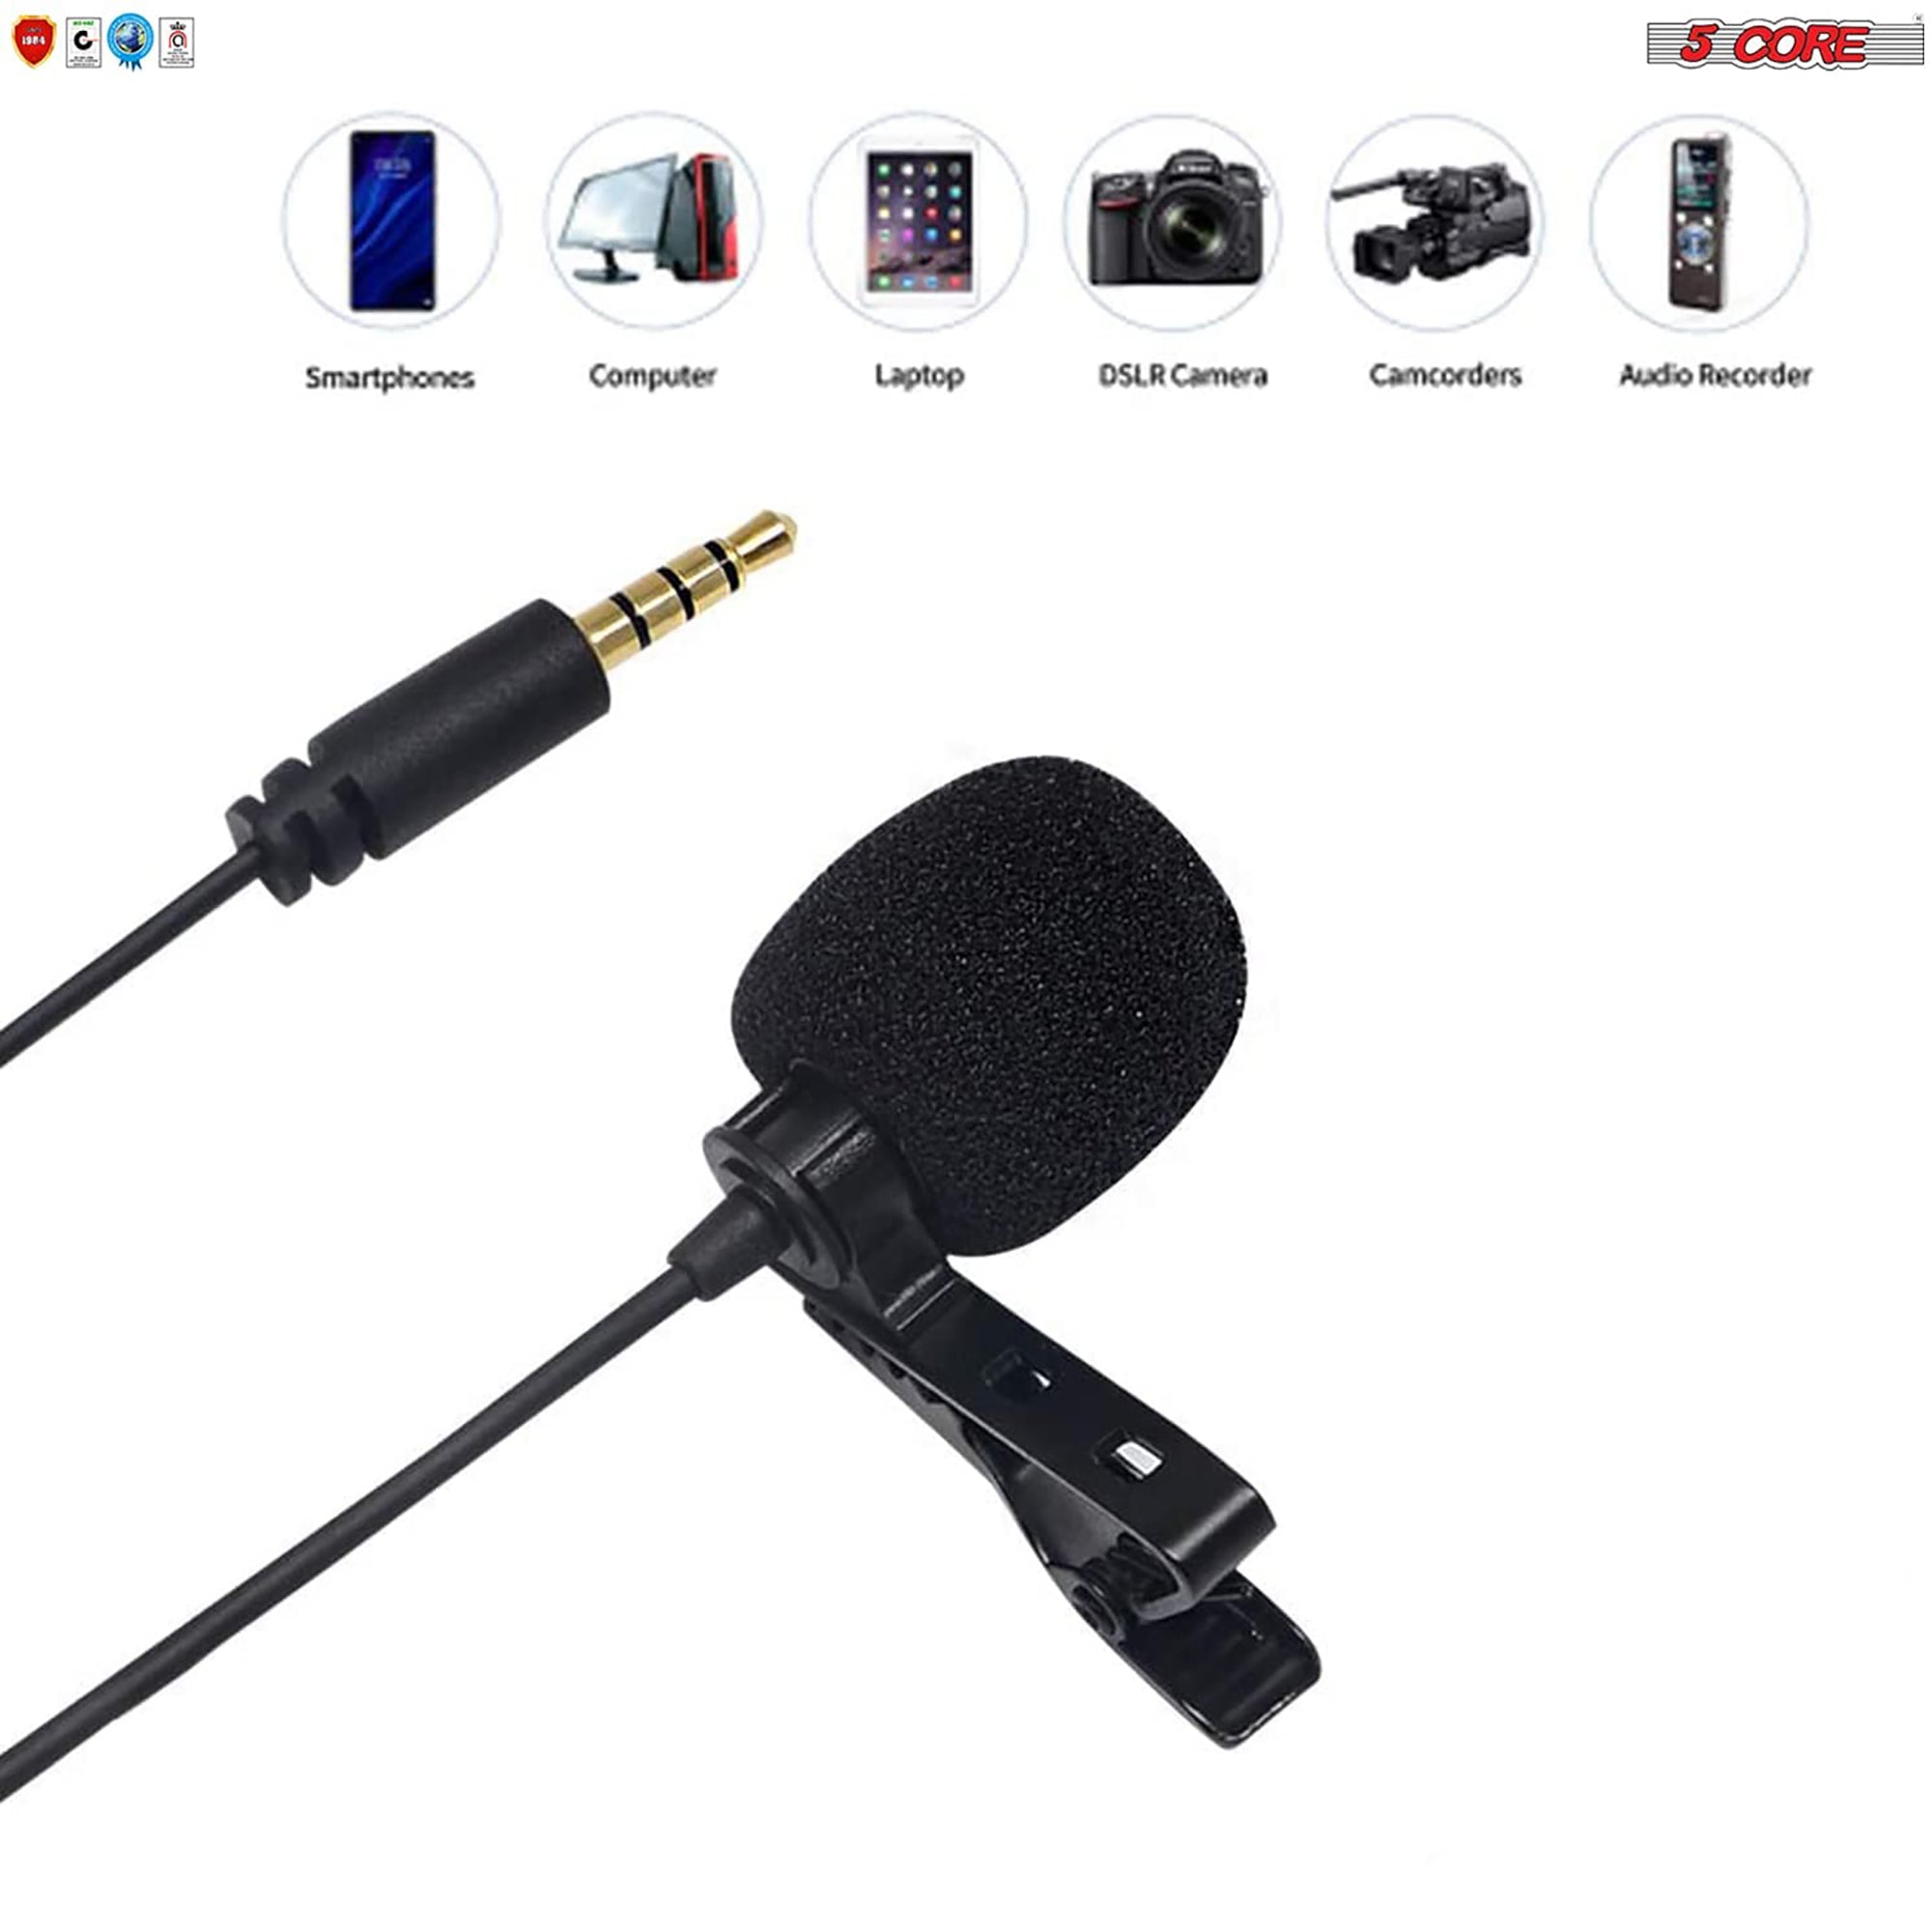 5 Core Professional Grade Lavalier Clip On Microphone| Premium Lav Mic for Camera, Phone, GoPro Video Recording | Compact Noise Cancelling 3.5mm Tiny Shirt Mic with Easy Clip and Windscreen- CM 001